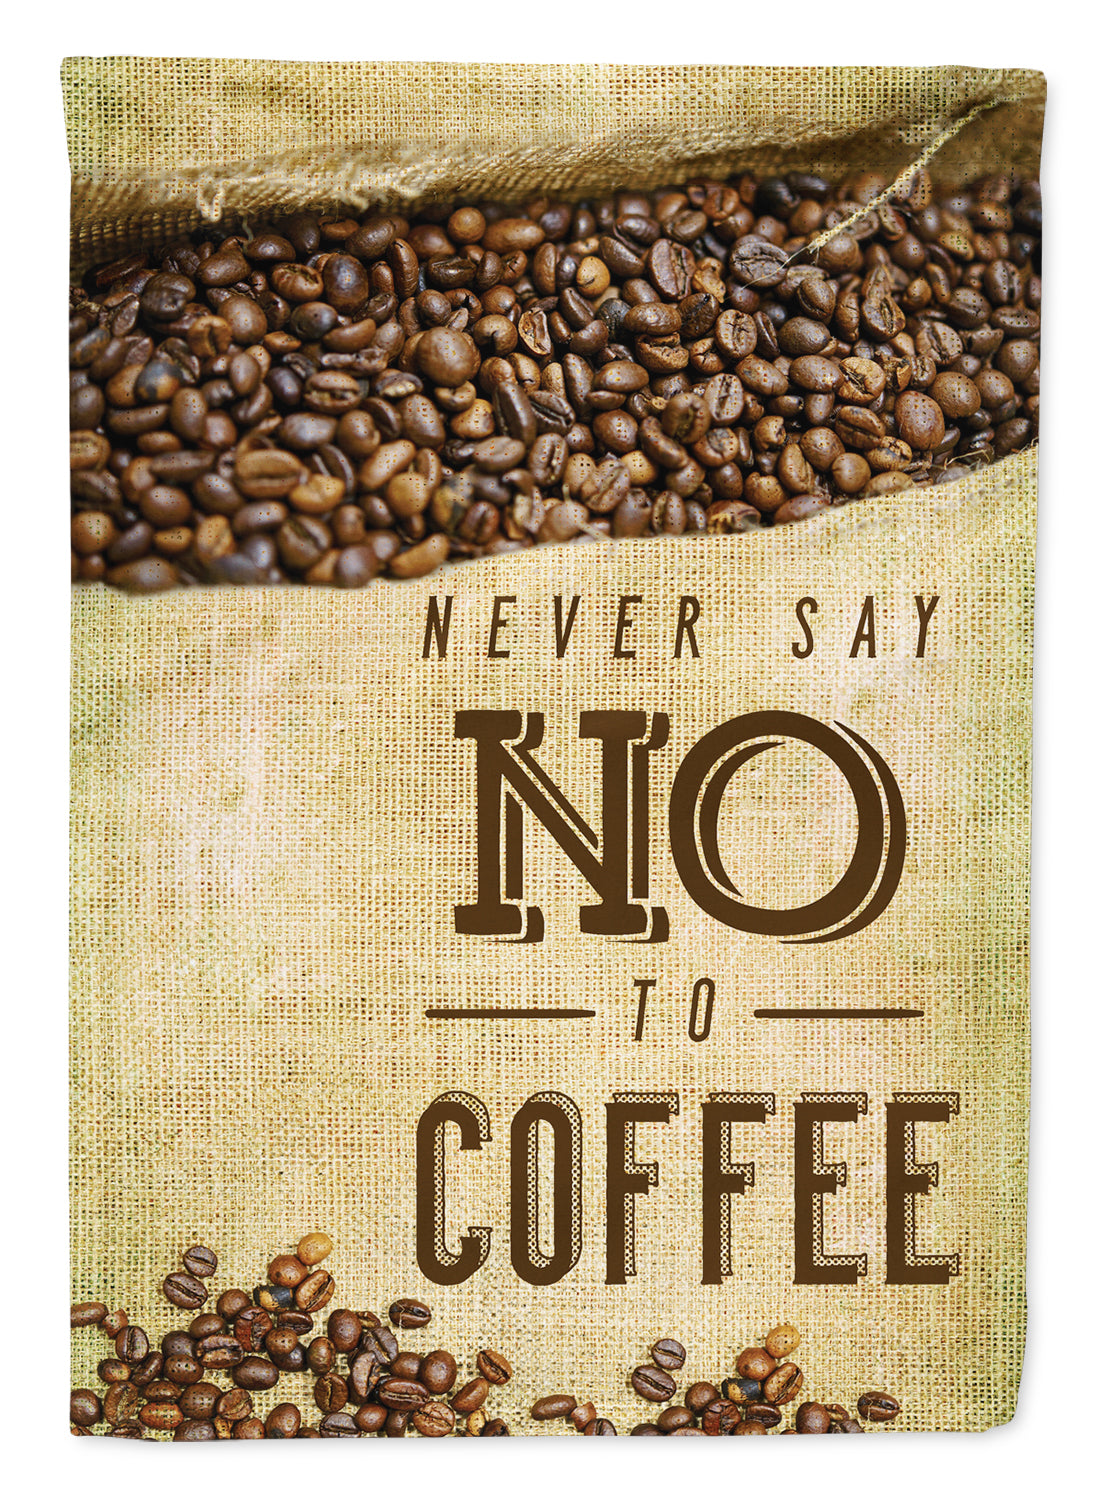 Never say No to Coffee Sign Flag Garden Size BB5406GF